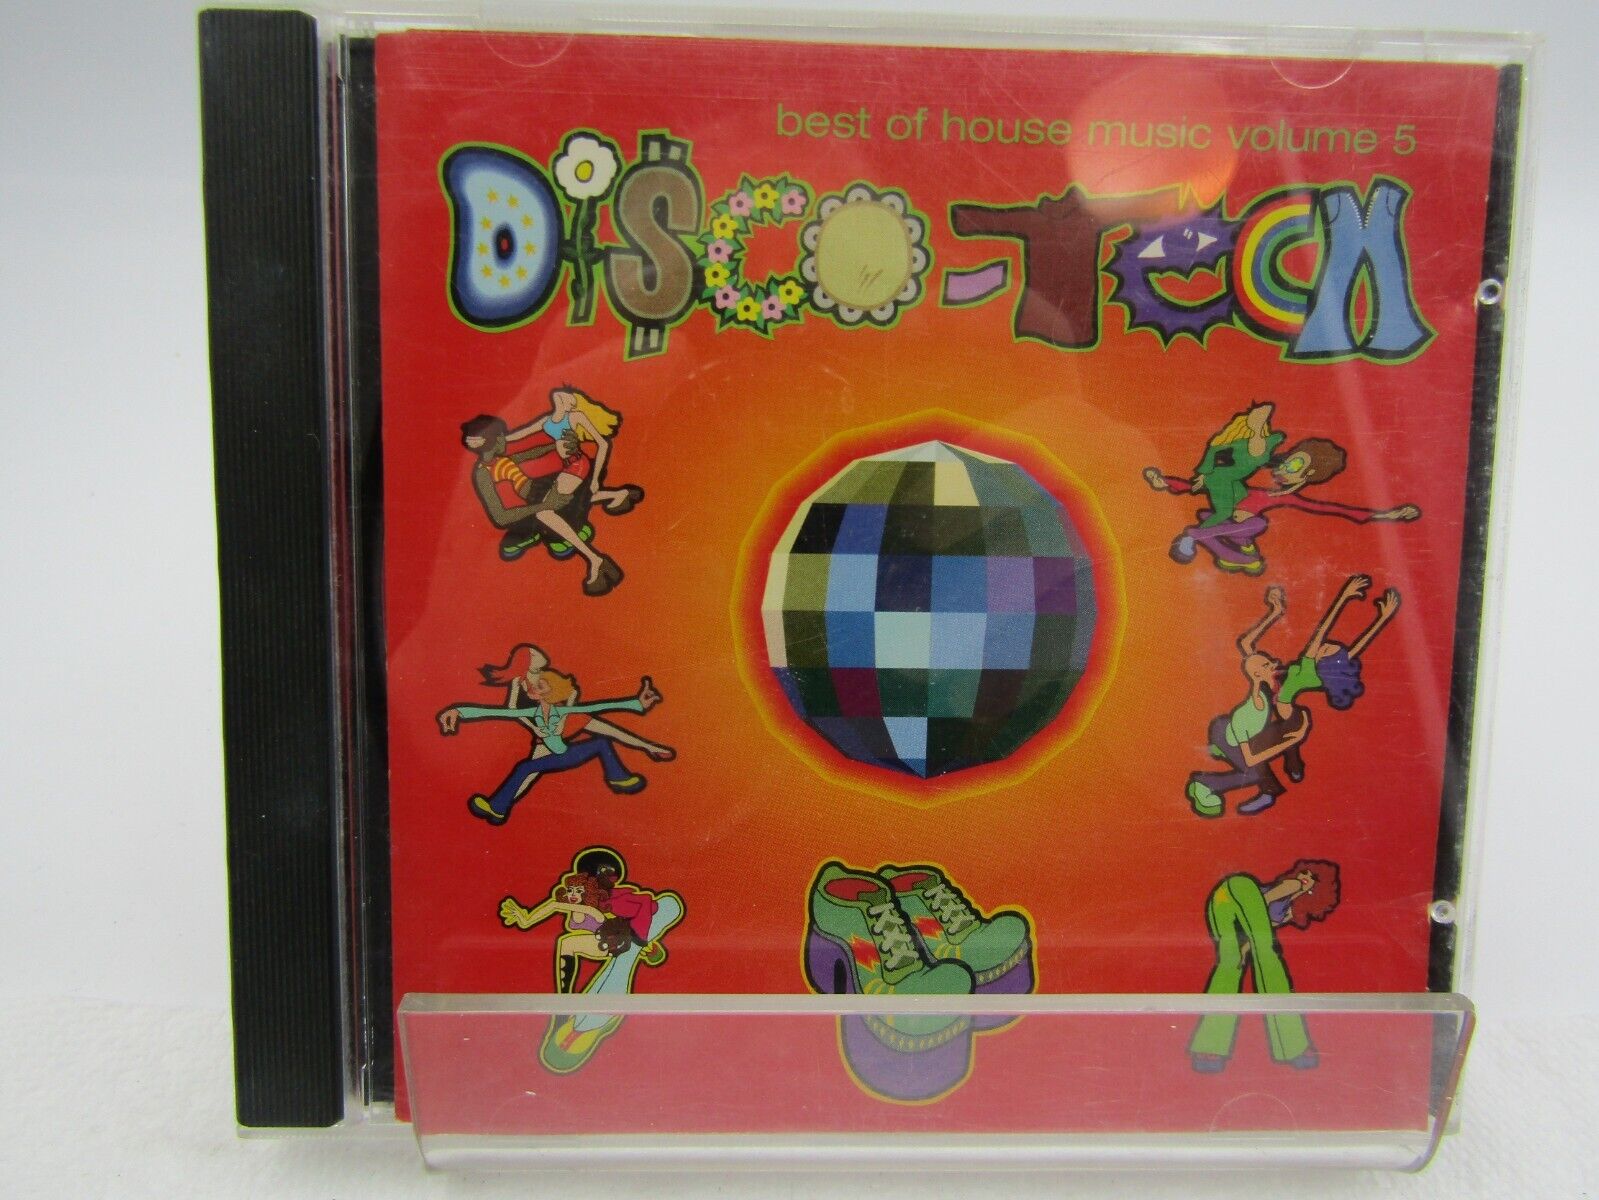 The Mighty Dub Cats : Best of House Music 5: Disco Tech CD